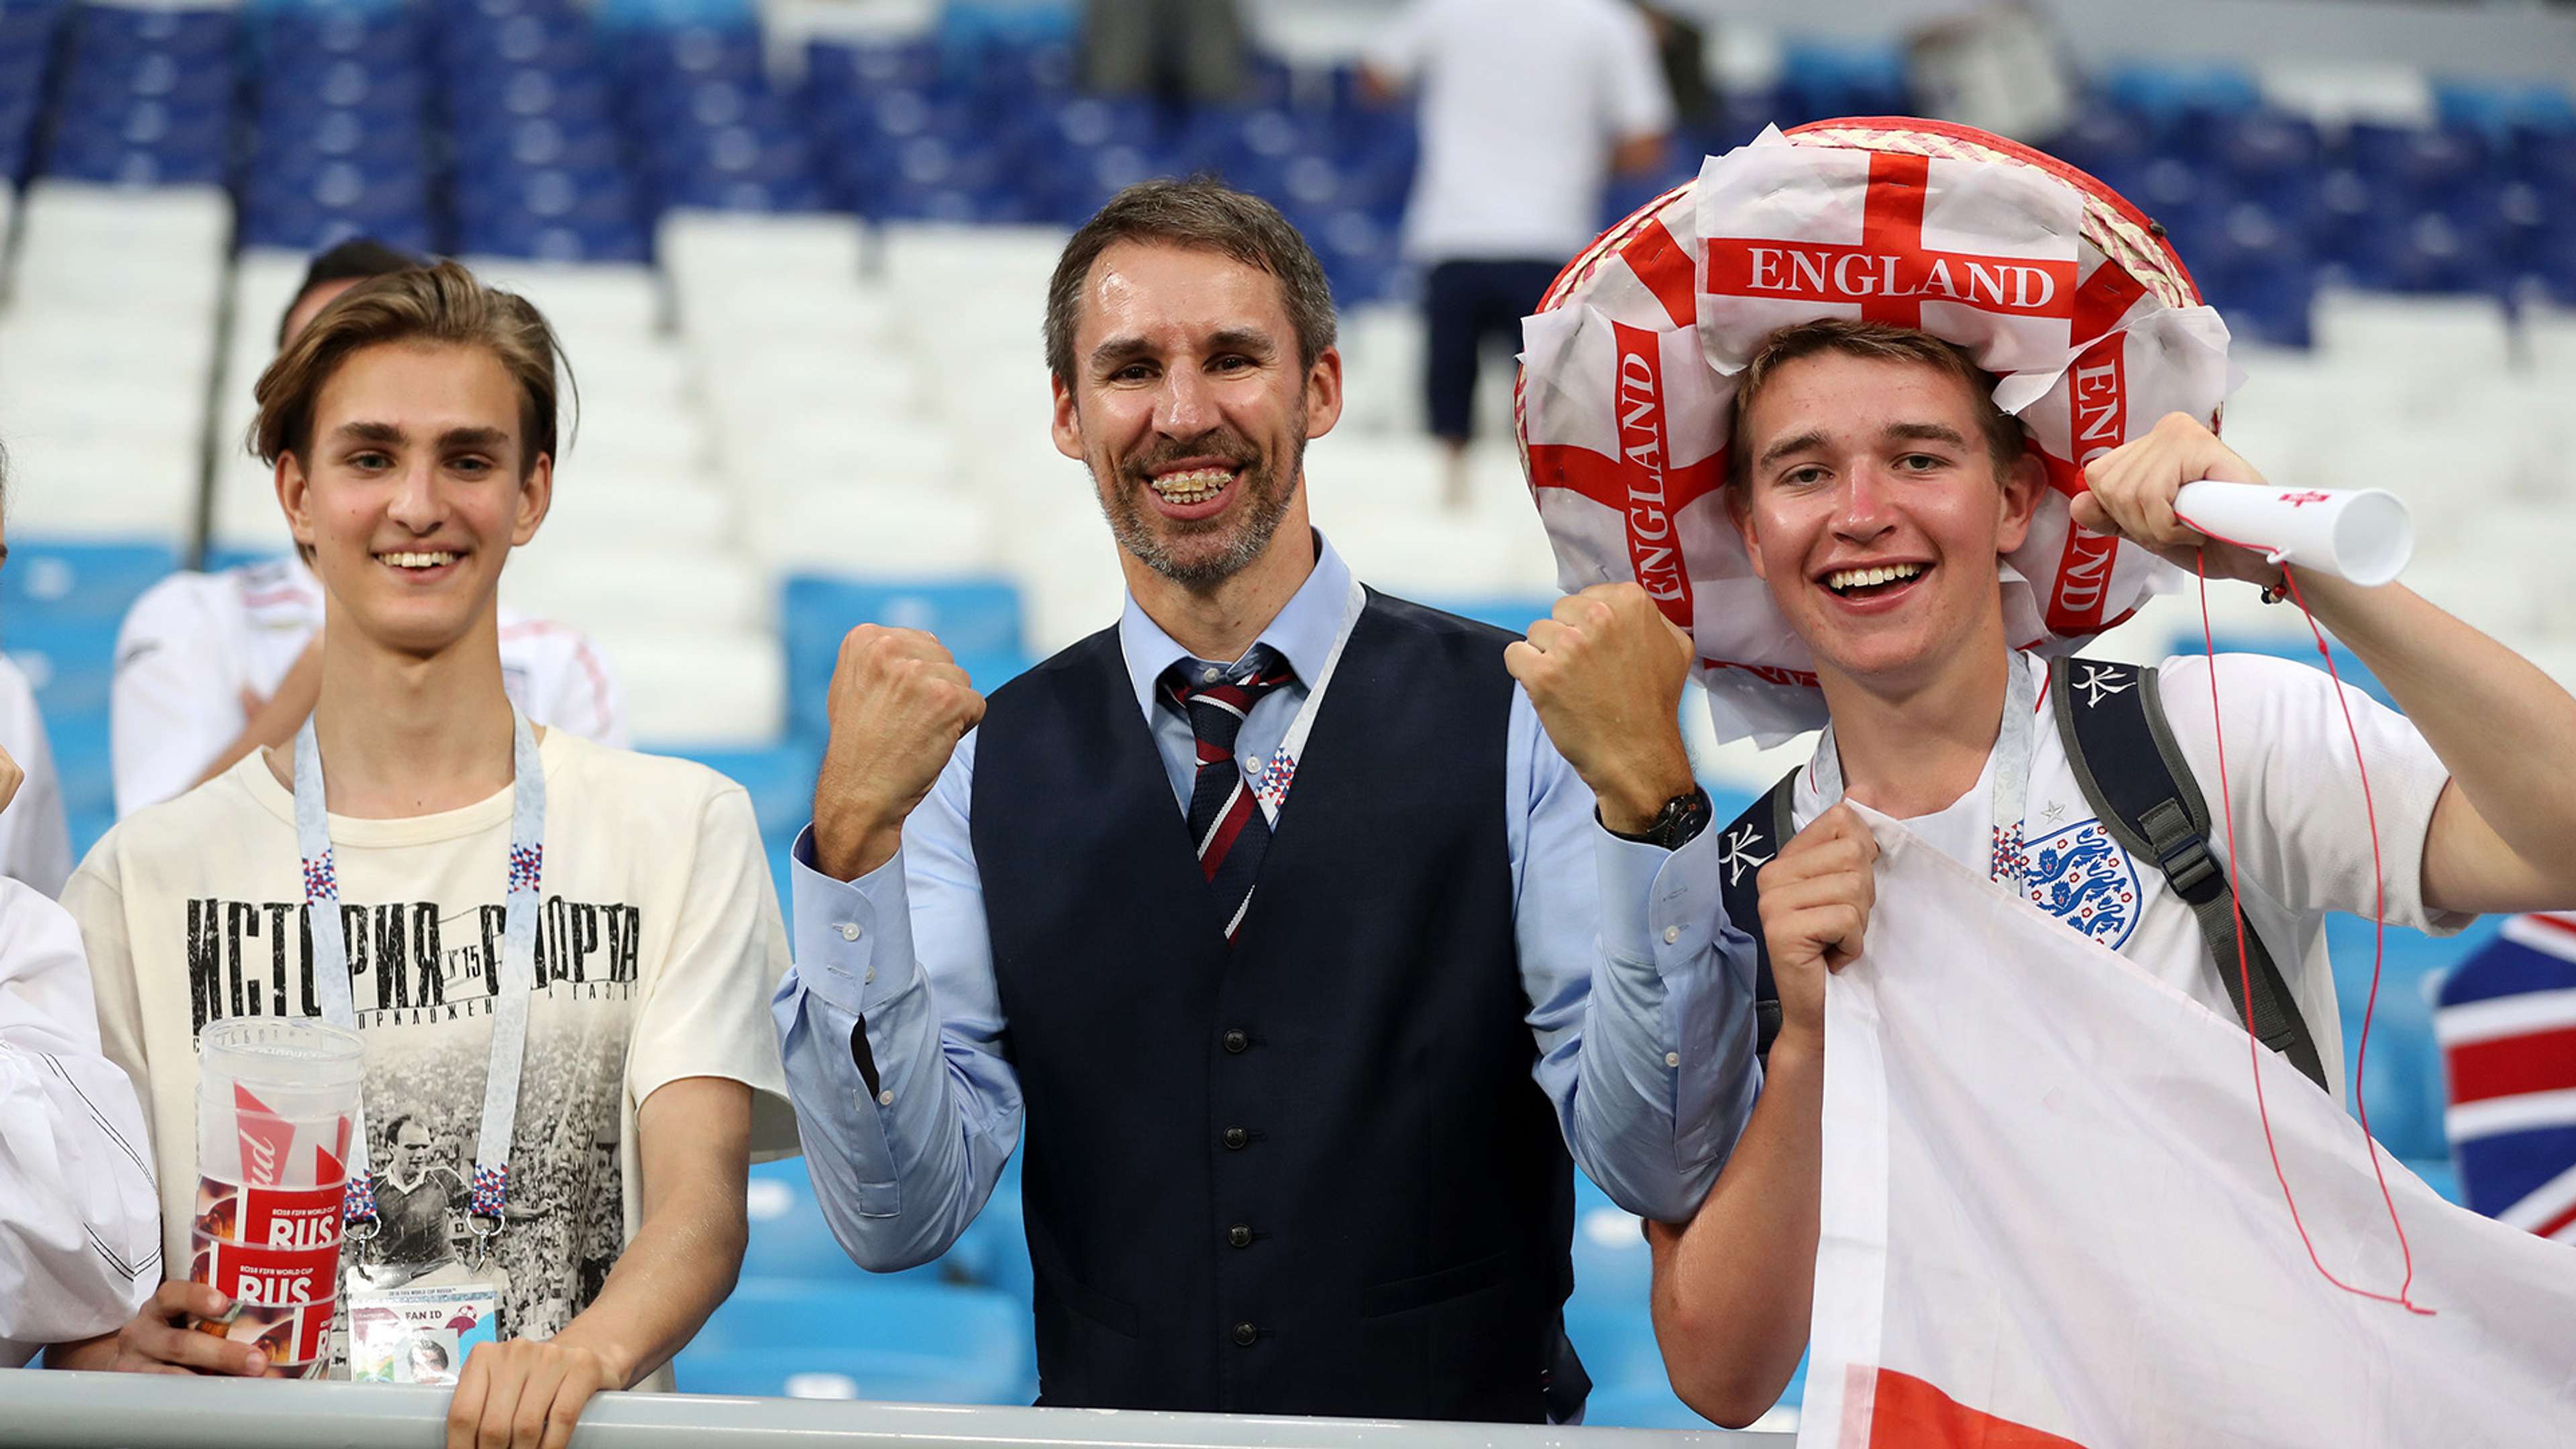 England fans Gareth Southgate lookalike World Cup 2018